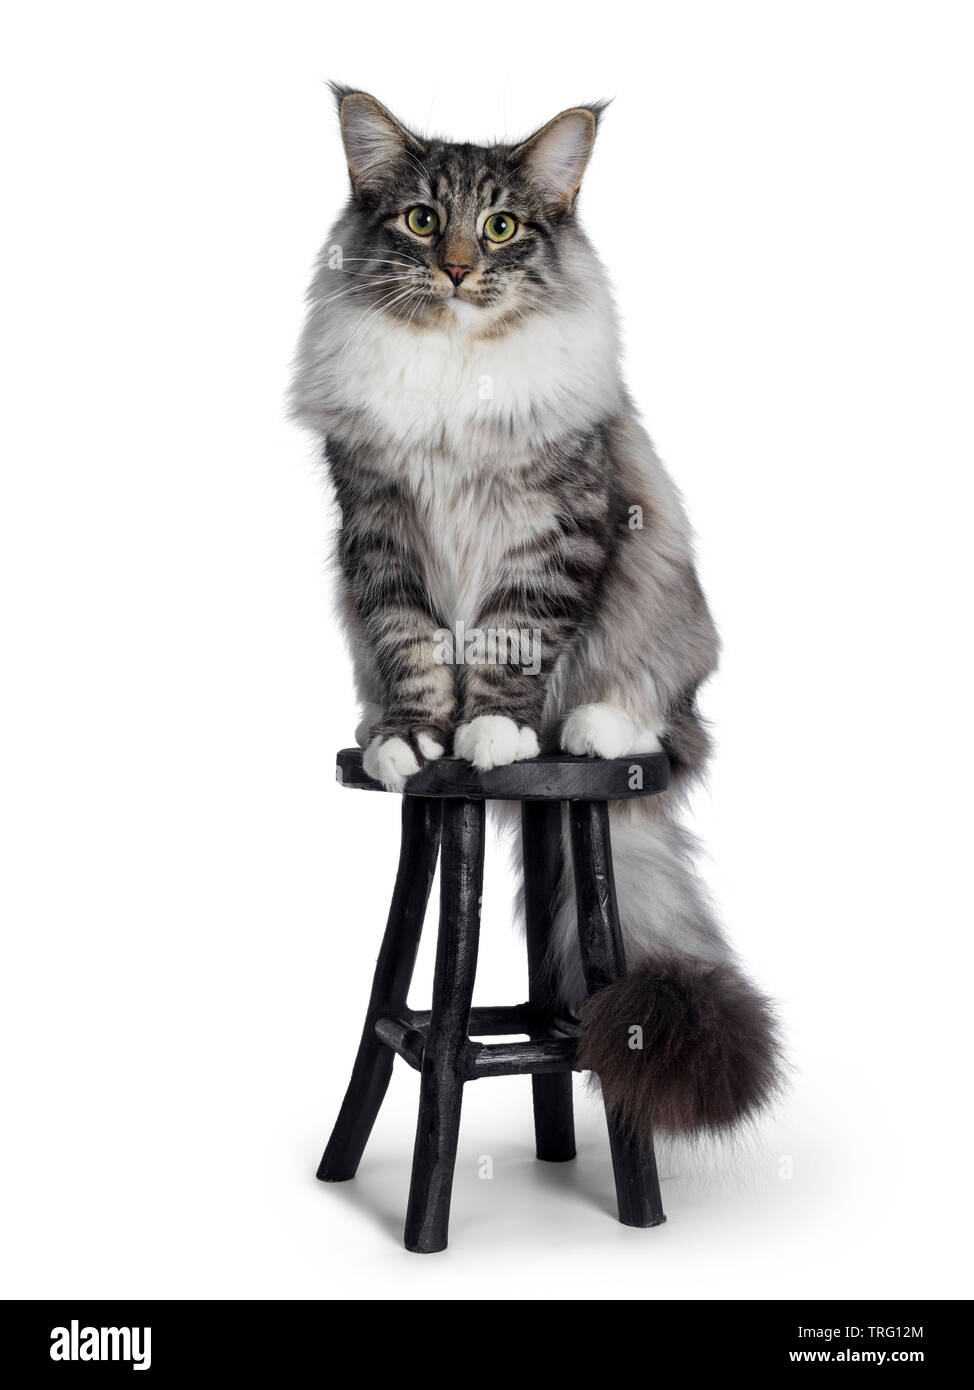 Cute Norwegian Forestcat youngster, sitting facing front on black wooden stool Looking at lens with green / yellow eyes. Isolated on white background. Stock Photo